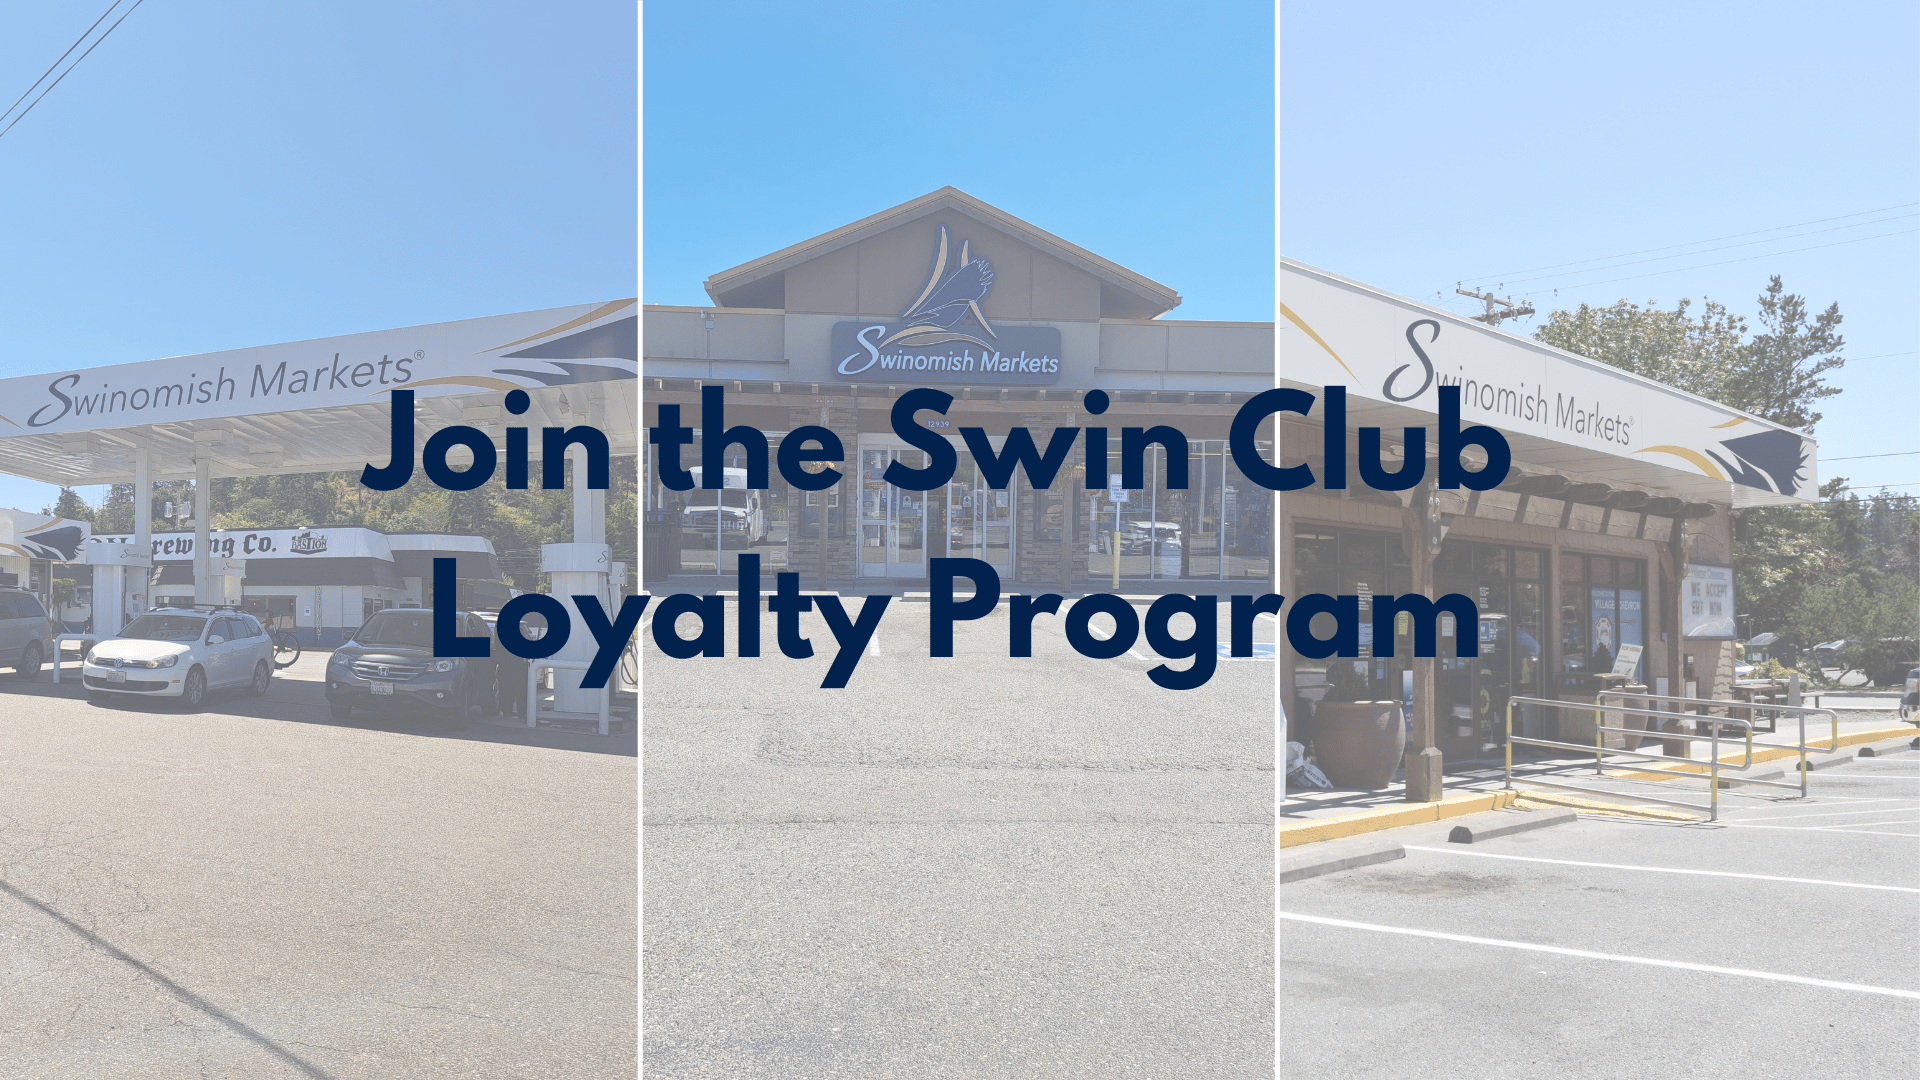 Get More With Each Purchase When You Join The Swin Club Loyalty Program